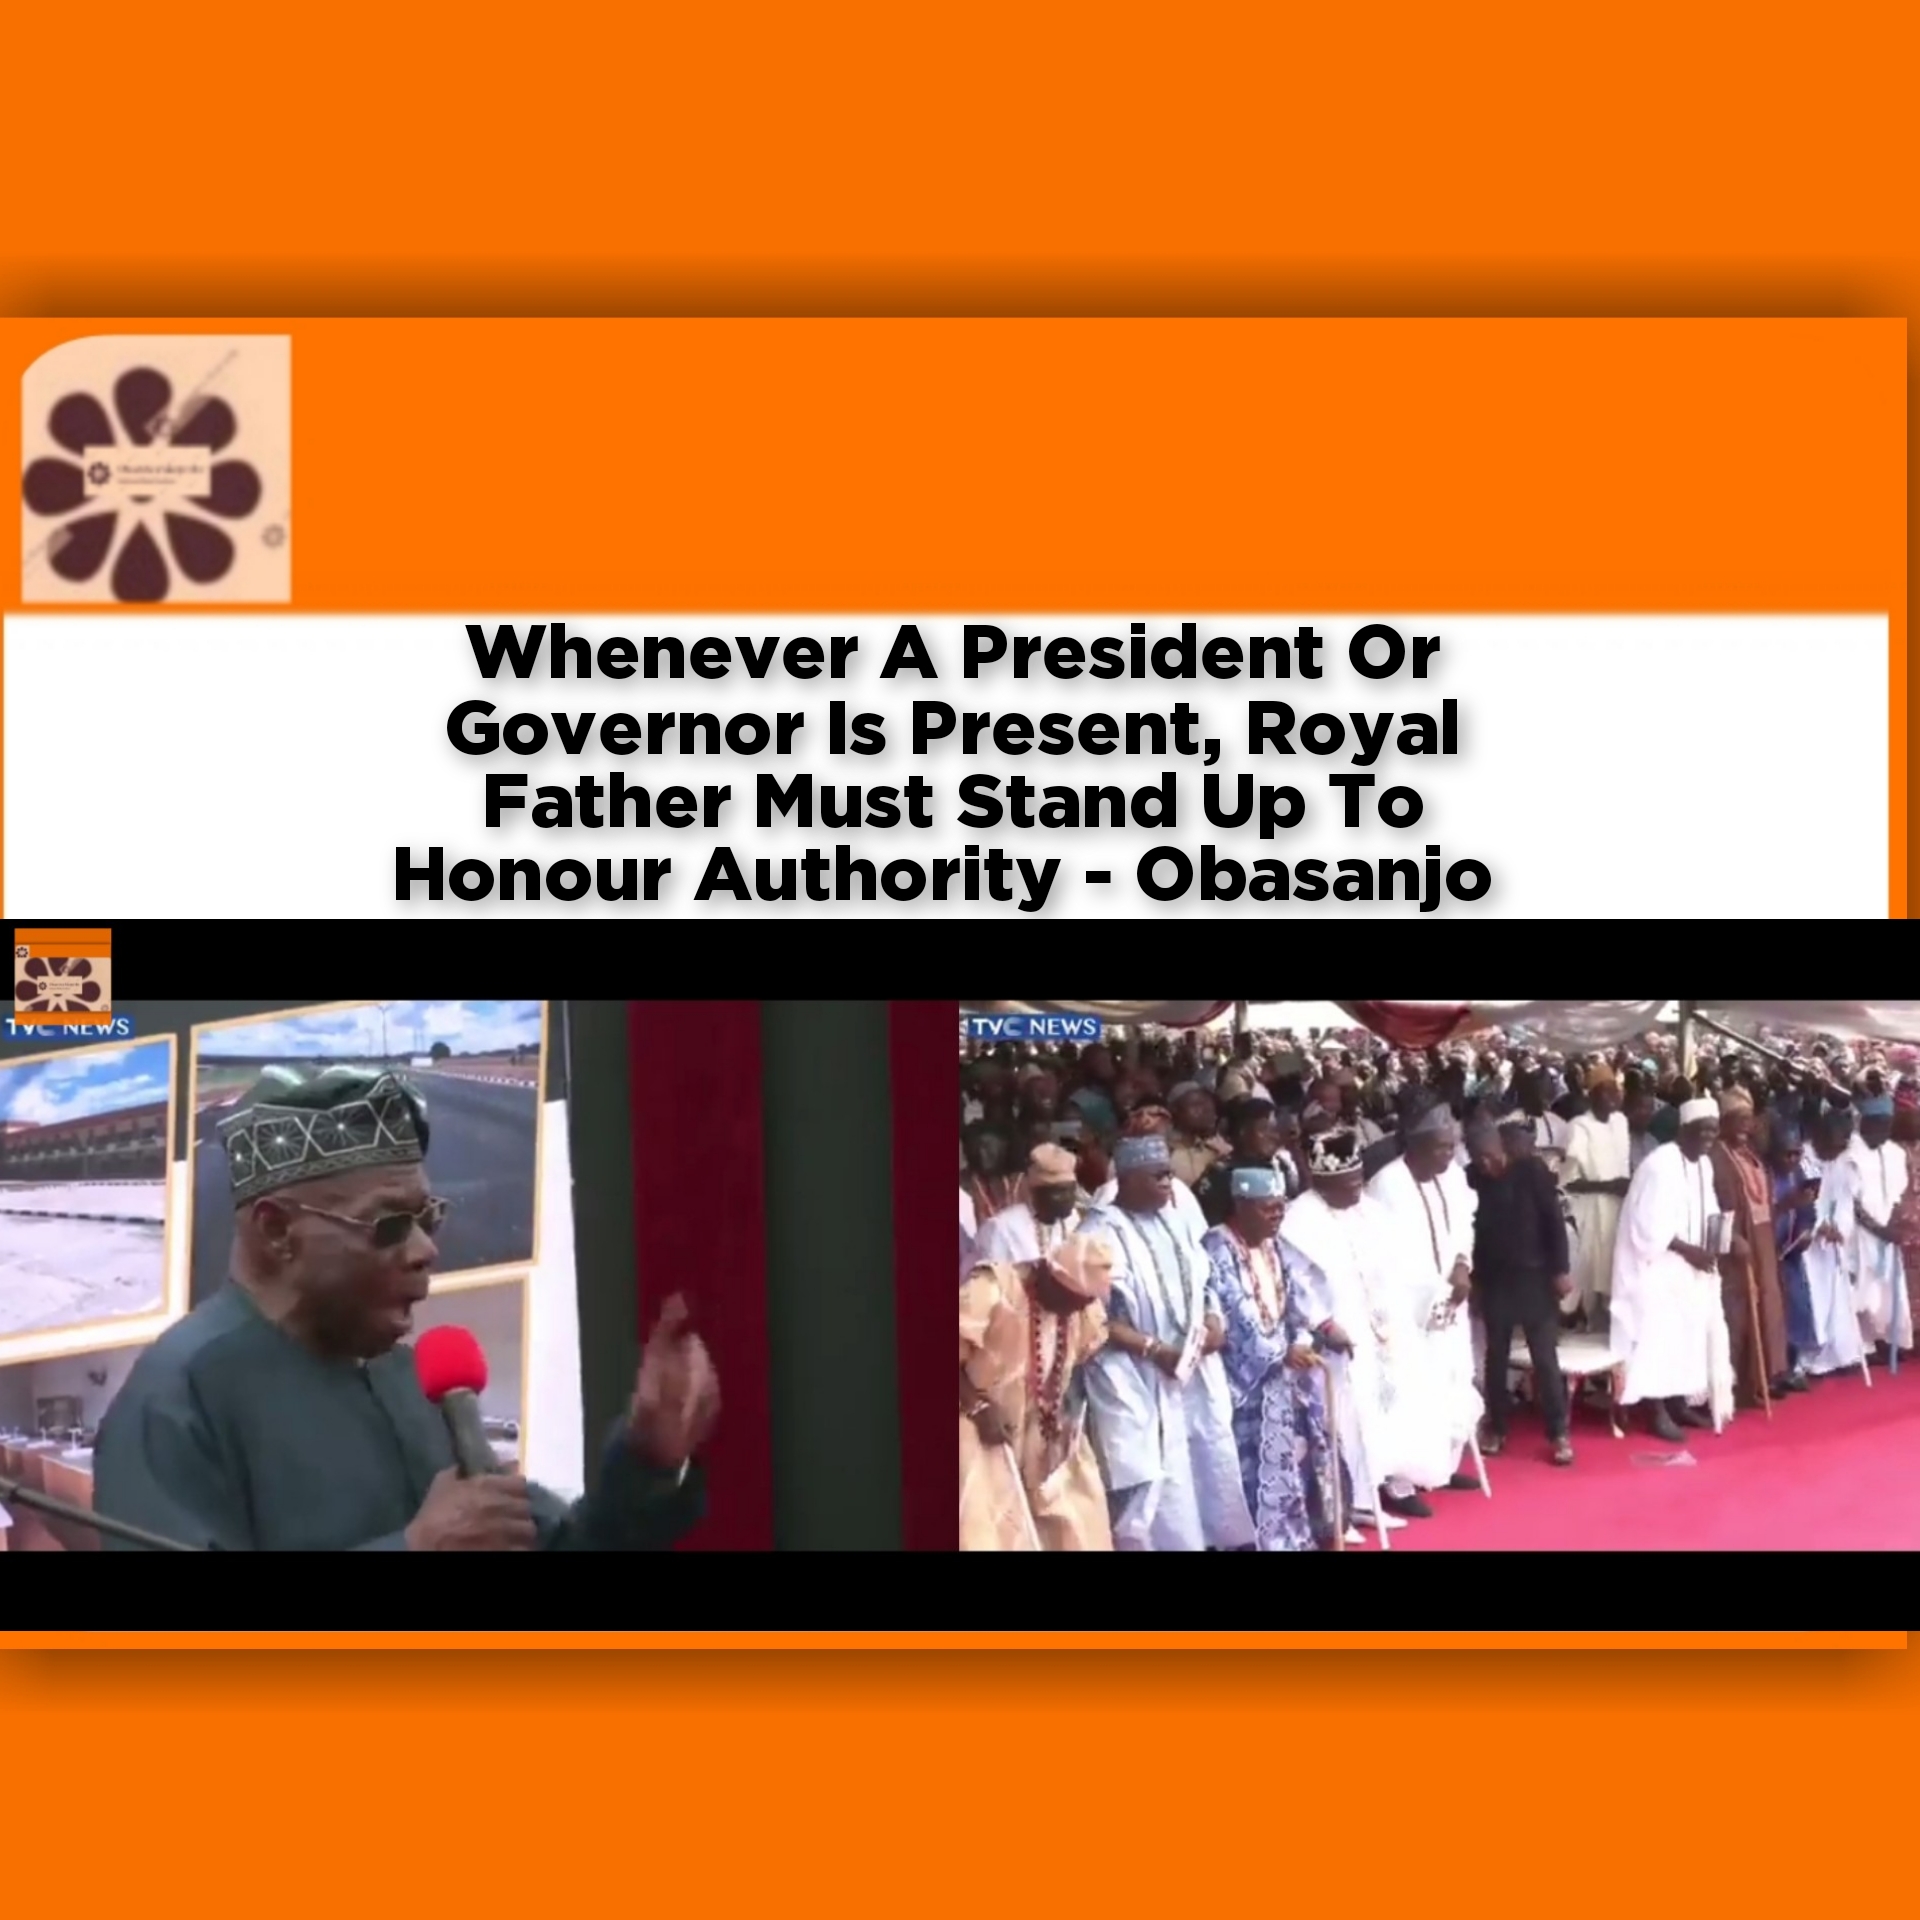 Whenever A President Or Governor Is Present, Royal Father Must Stand Up To Honour Authority - Obasanjo ~ OsazuwaAkonedo #Charles